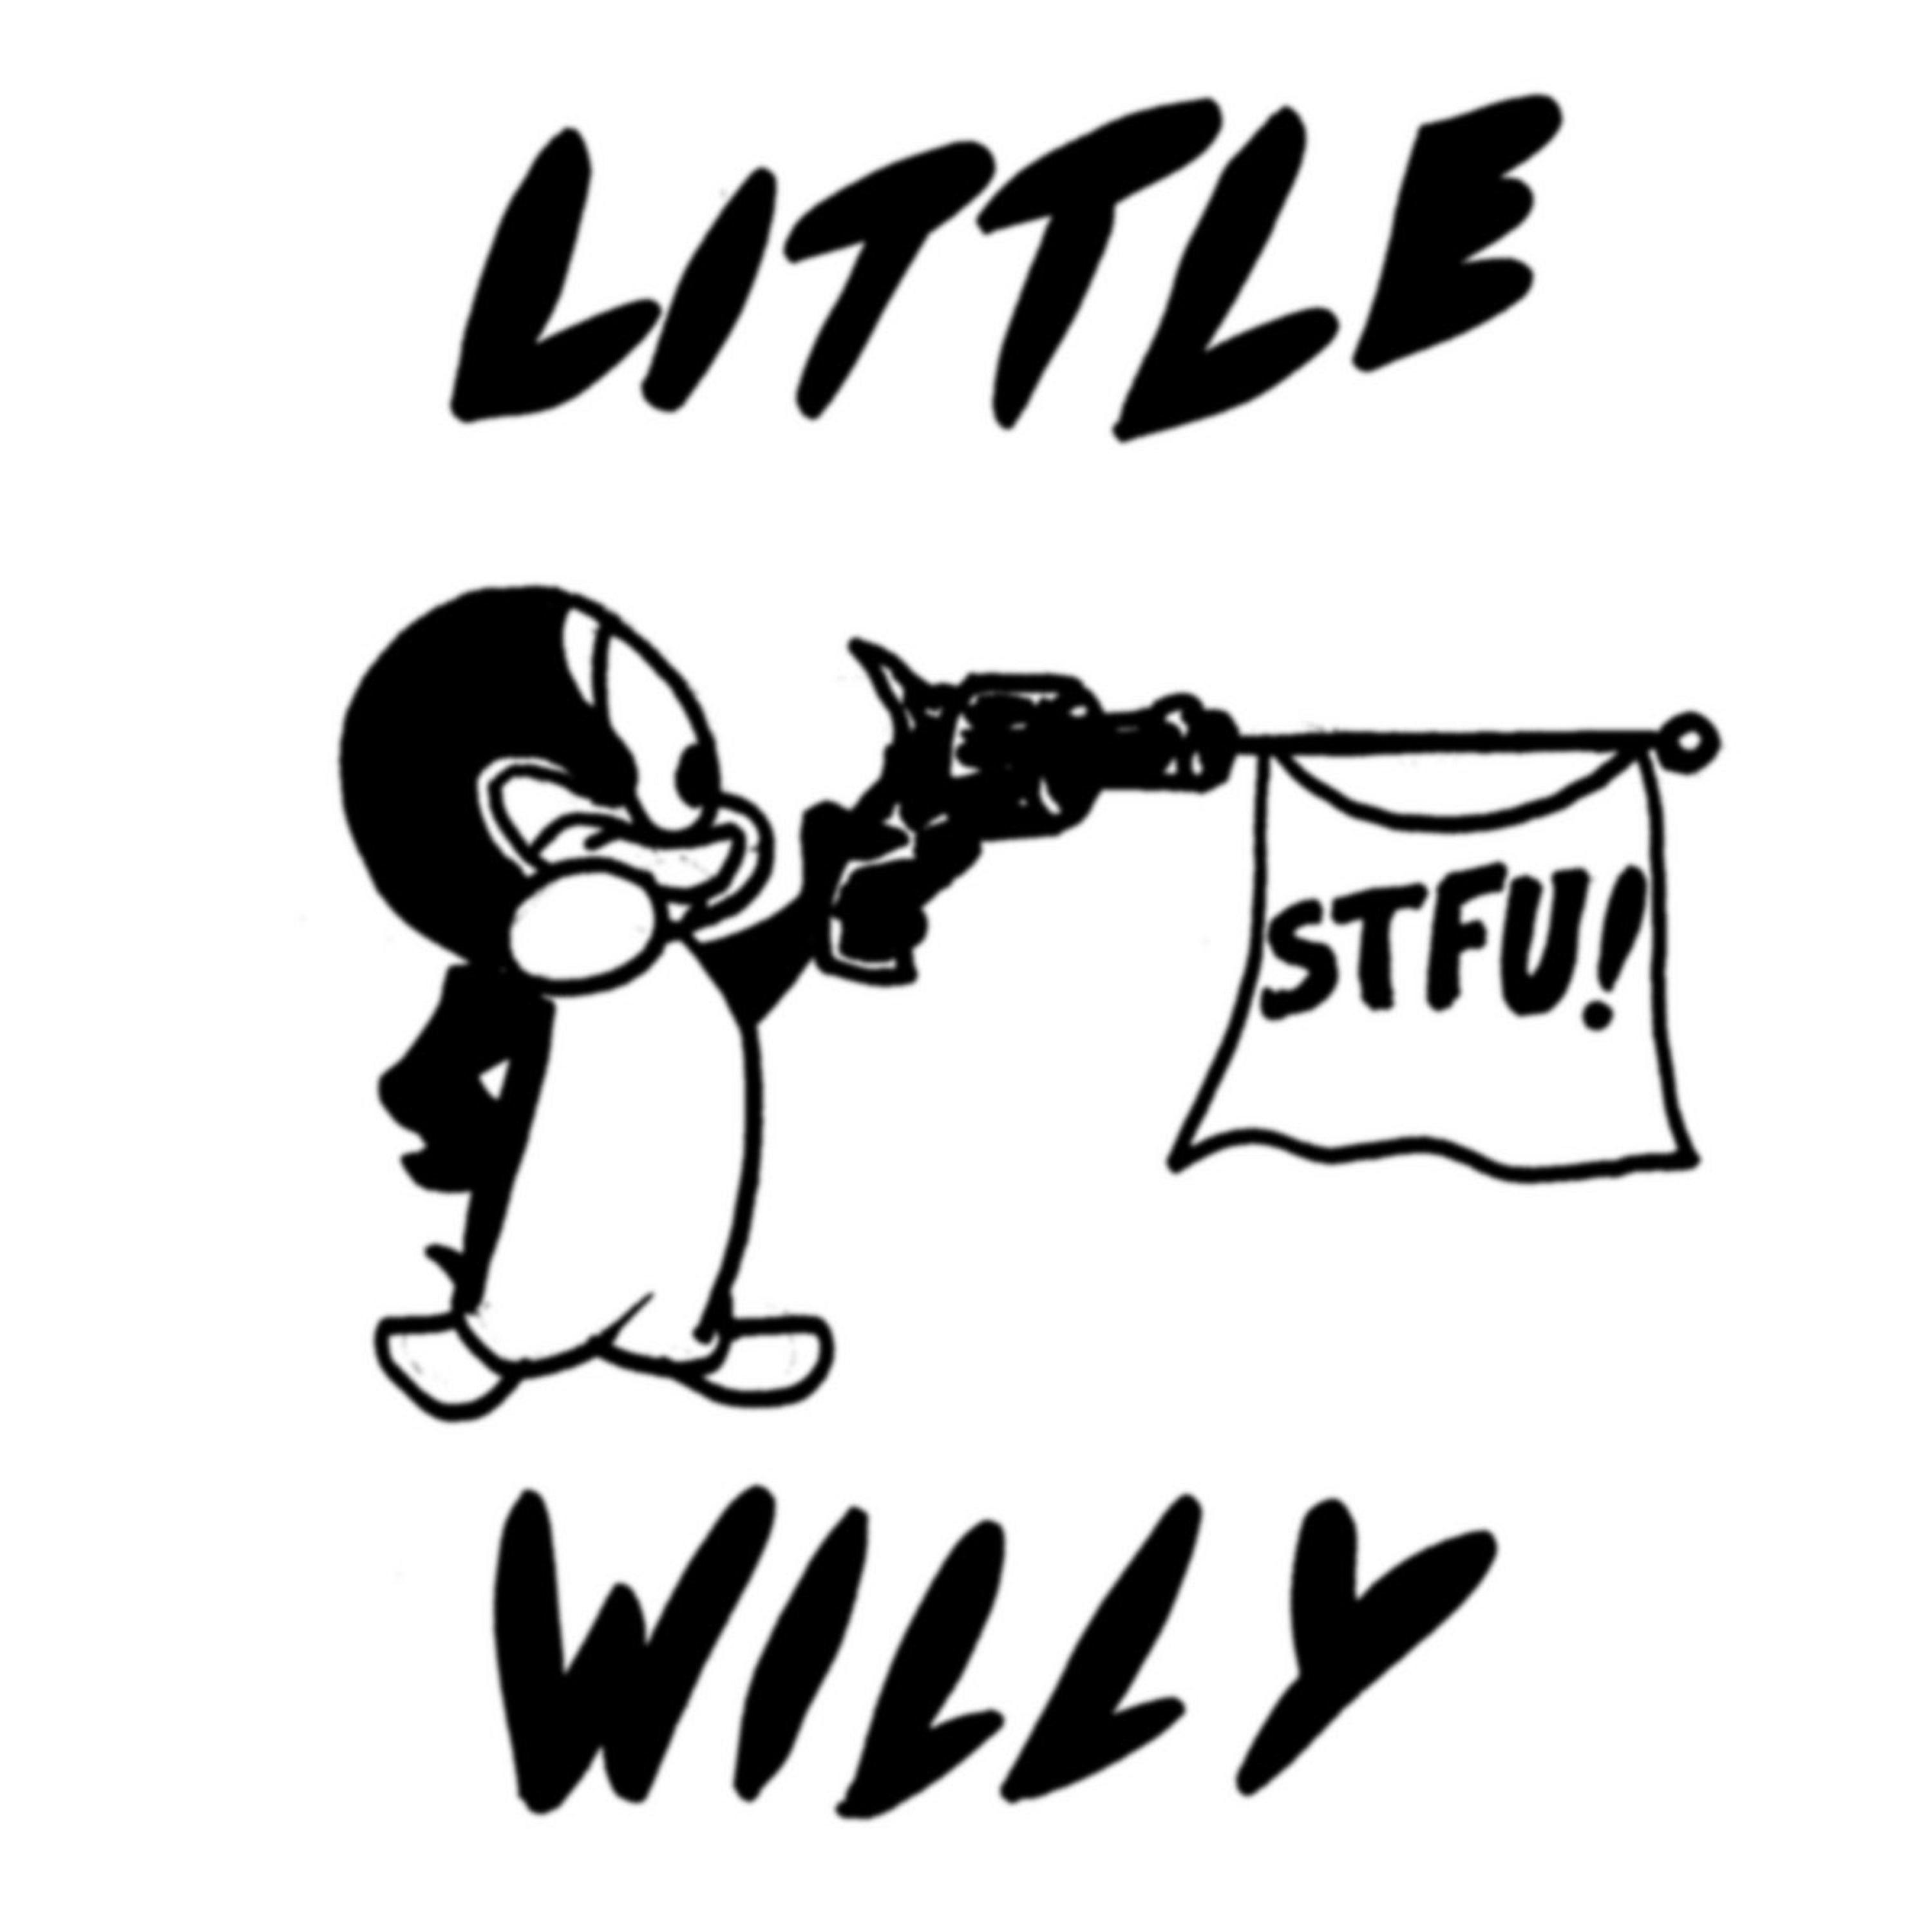 Little Willy - STFU